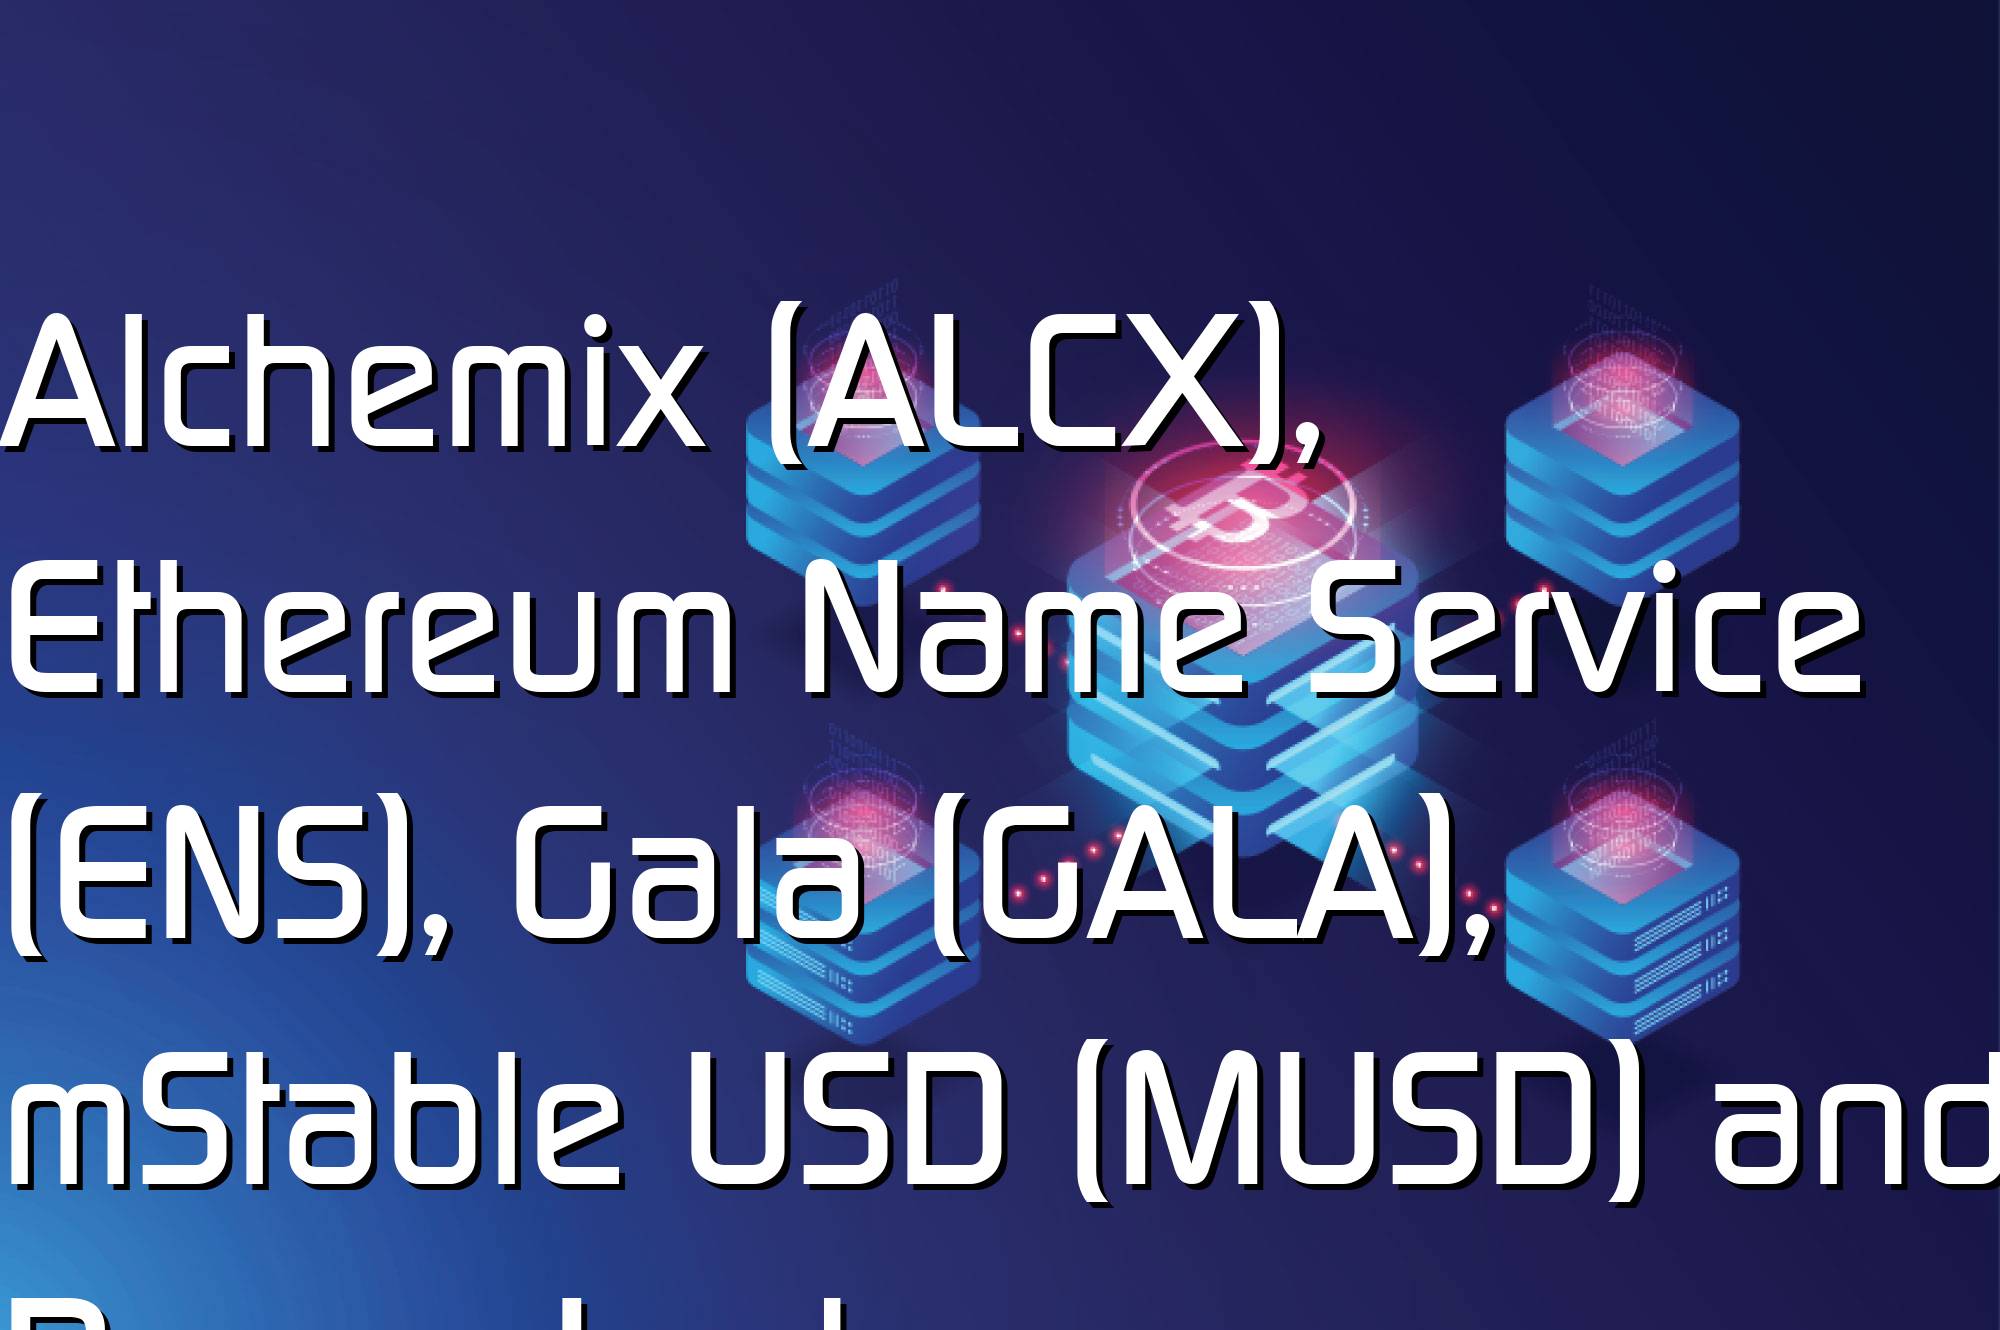 @$61740: Alchemix (ALCX), Ethereum Name Service (ENS), Gala (GALA), mStable USD (MUSD) and Power Ledger…